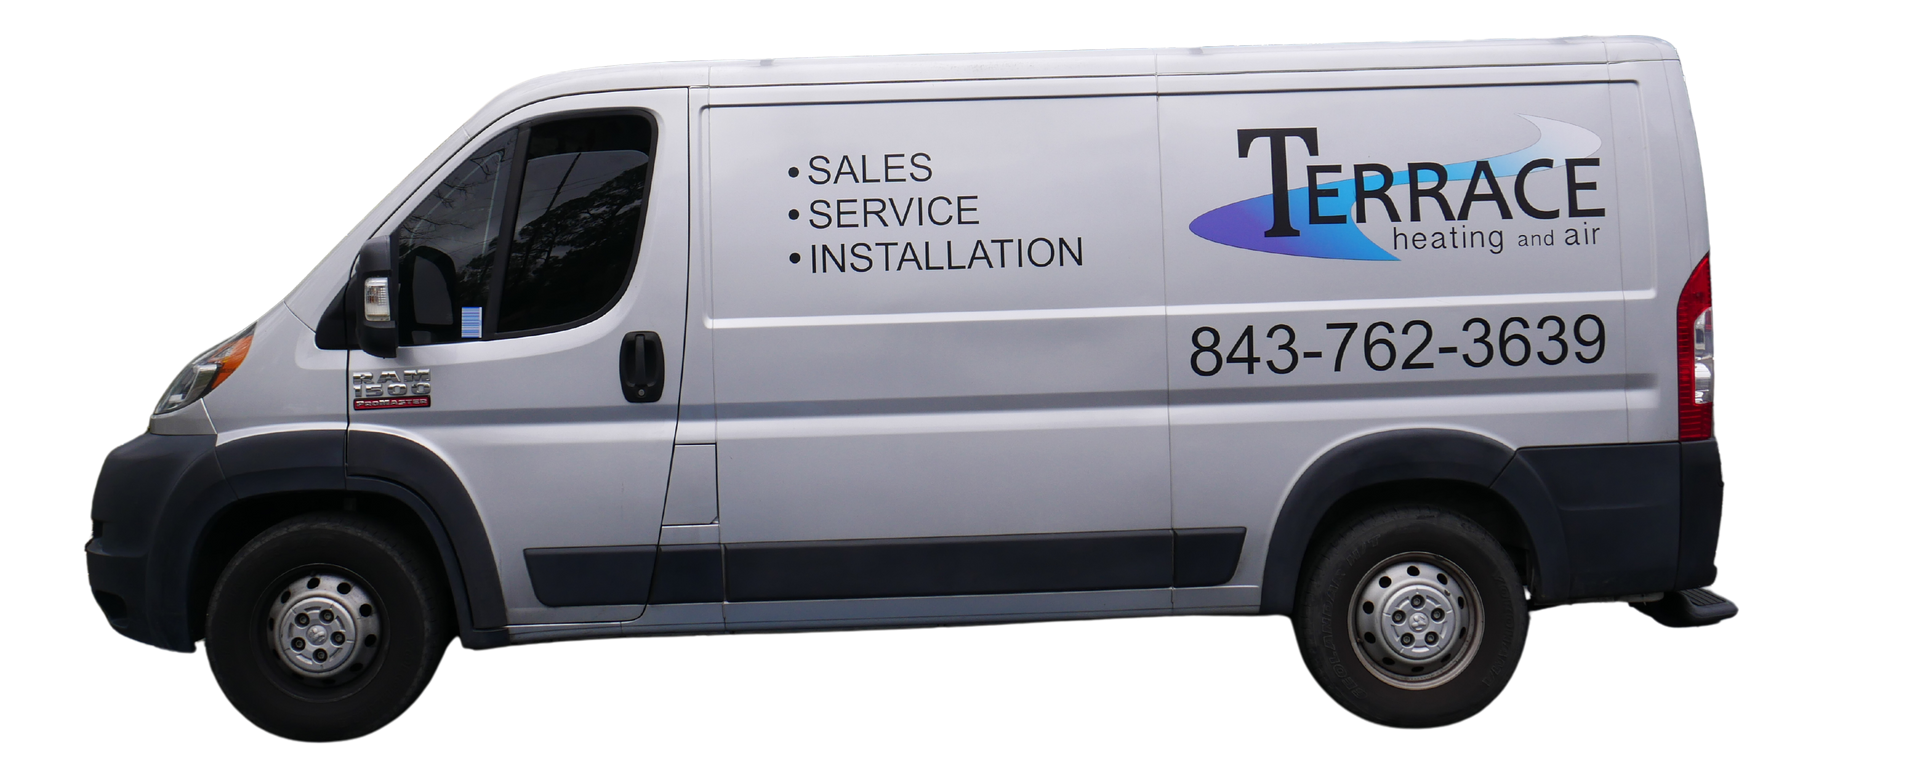 Terrace Heating and Air HVAC Service Truck